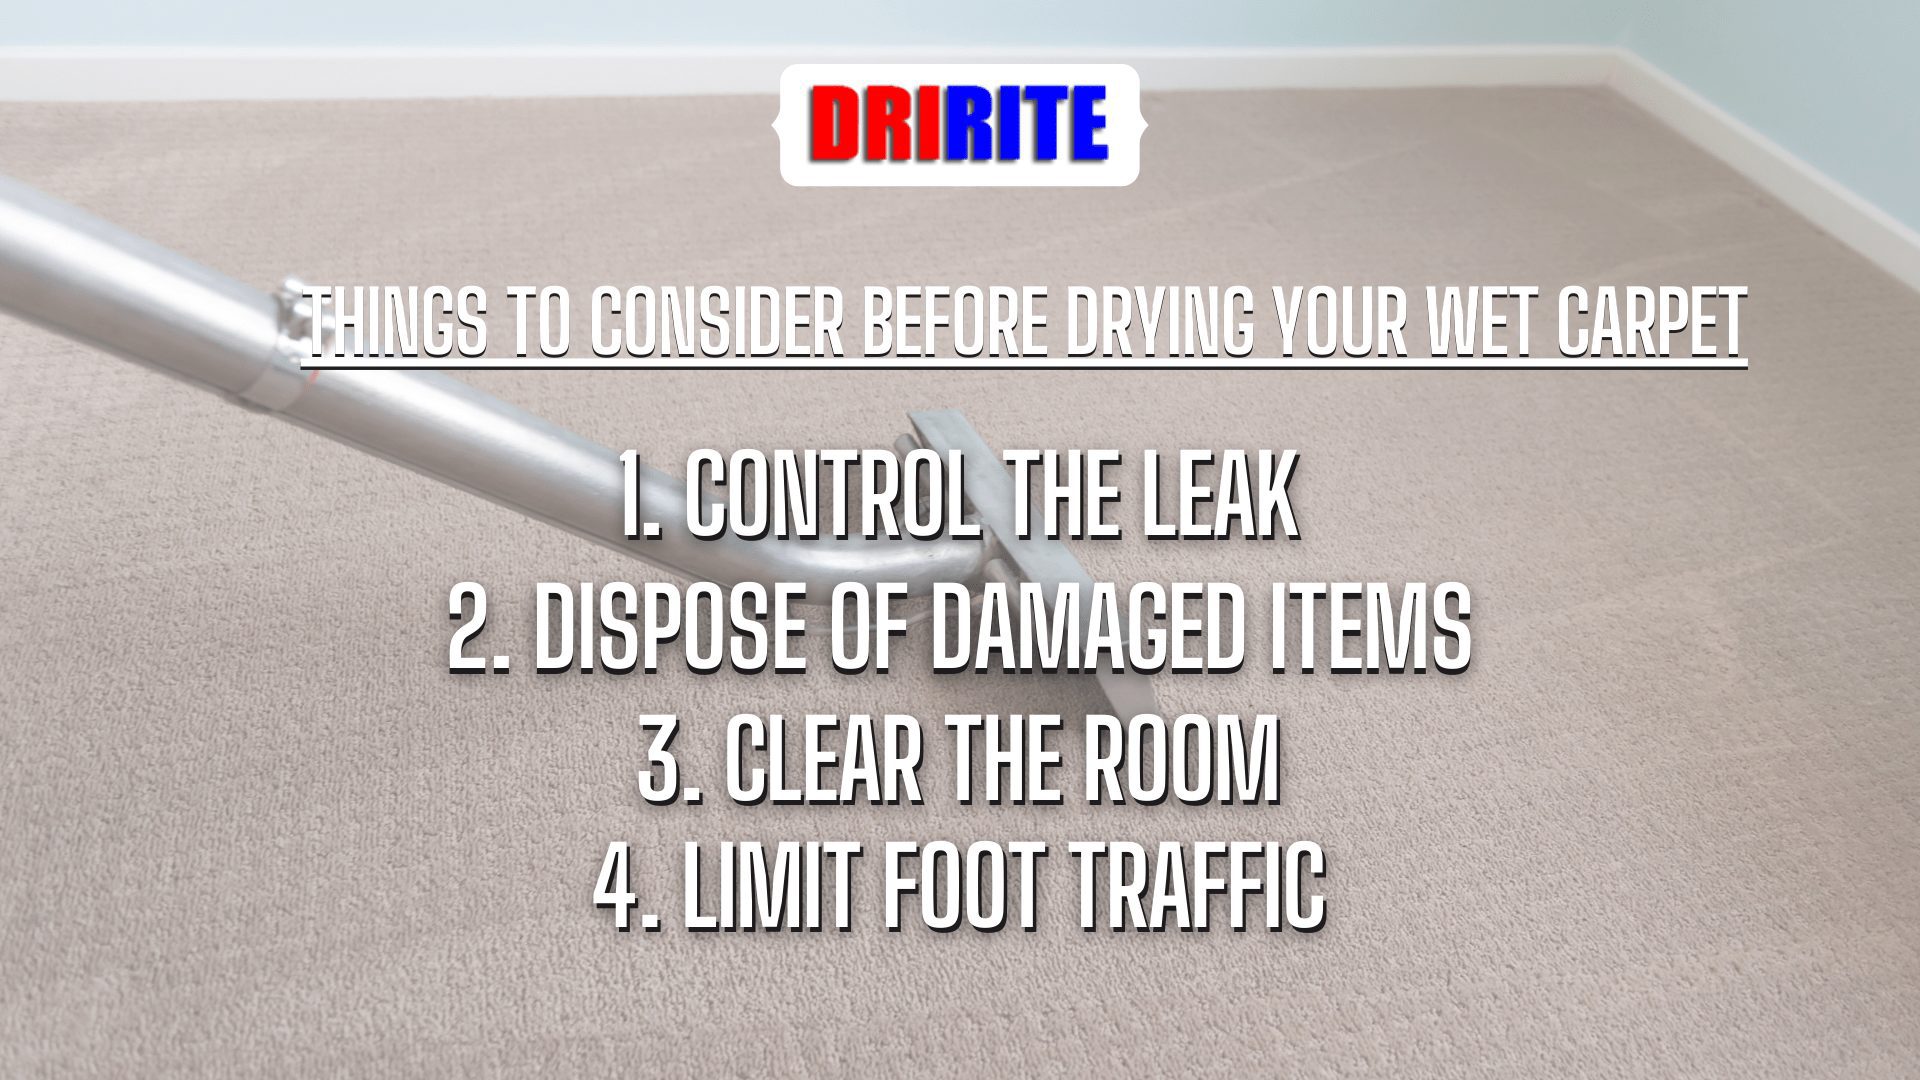 Things to Consider Before Drying Your Wet Carpet